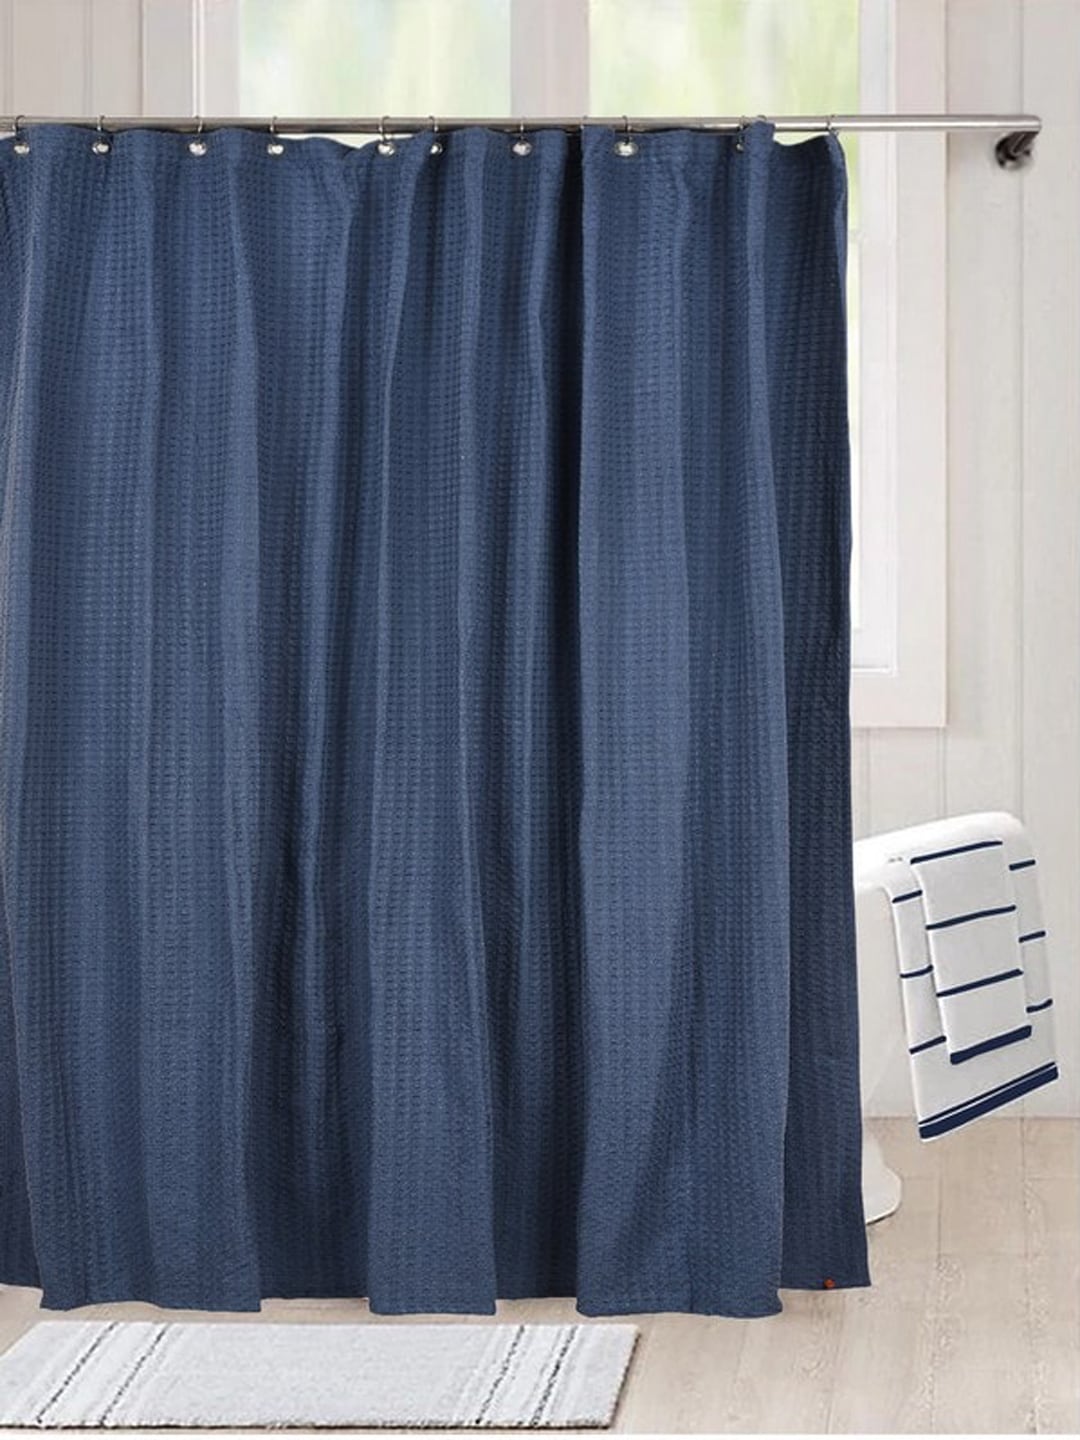 Lushomes Blue Self-Design Waffle Weave Shower Curtain With 12 Metal Grommets Price in India